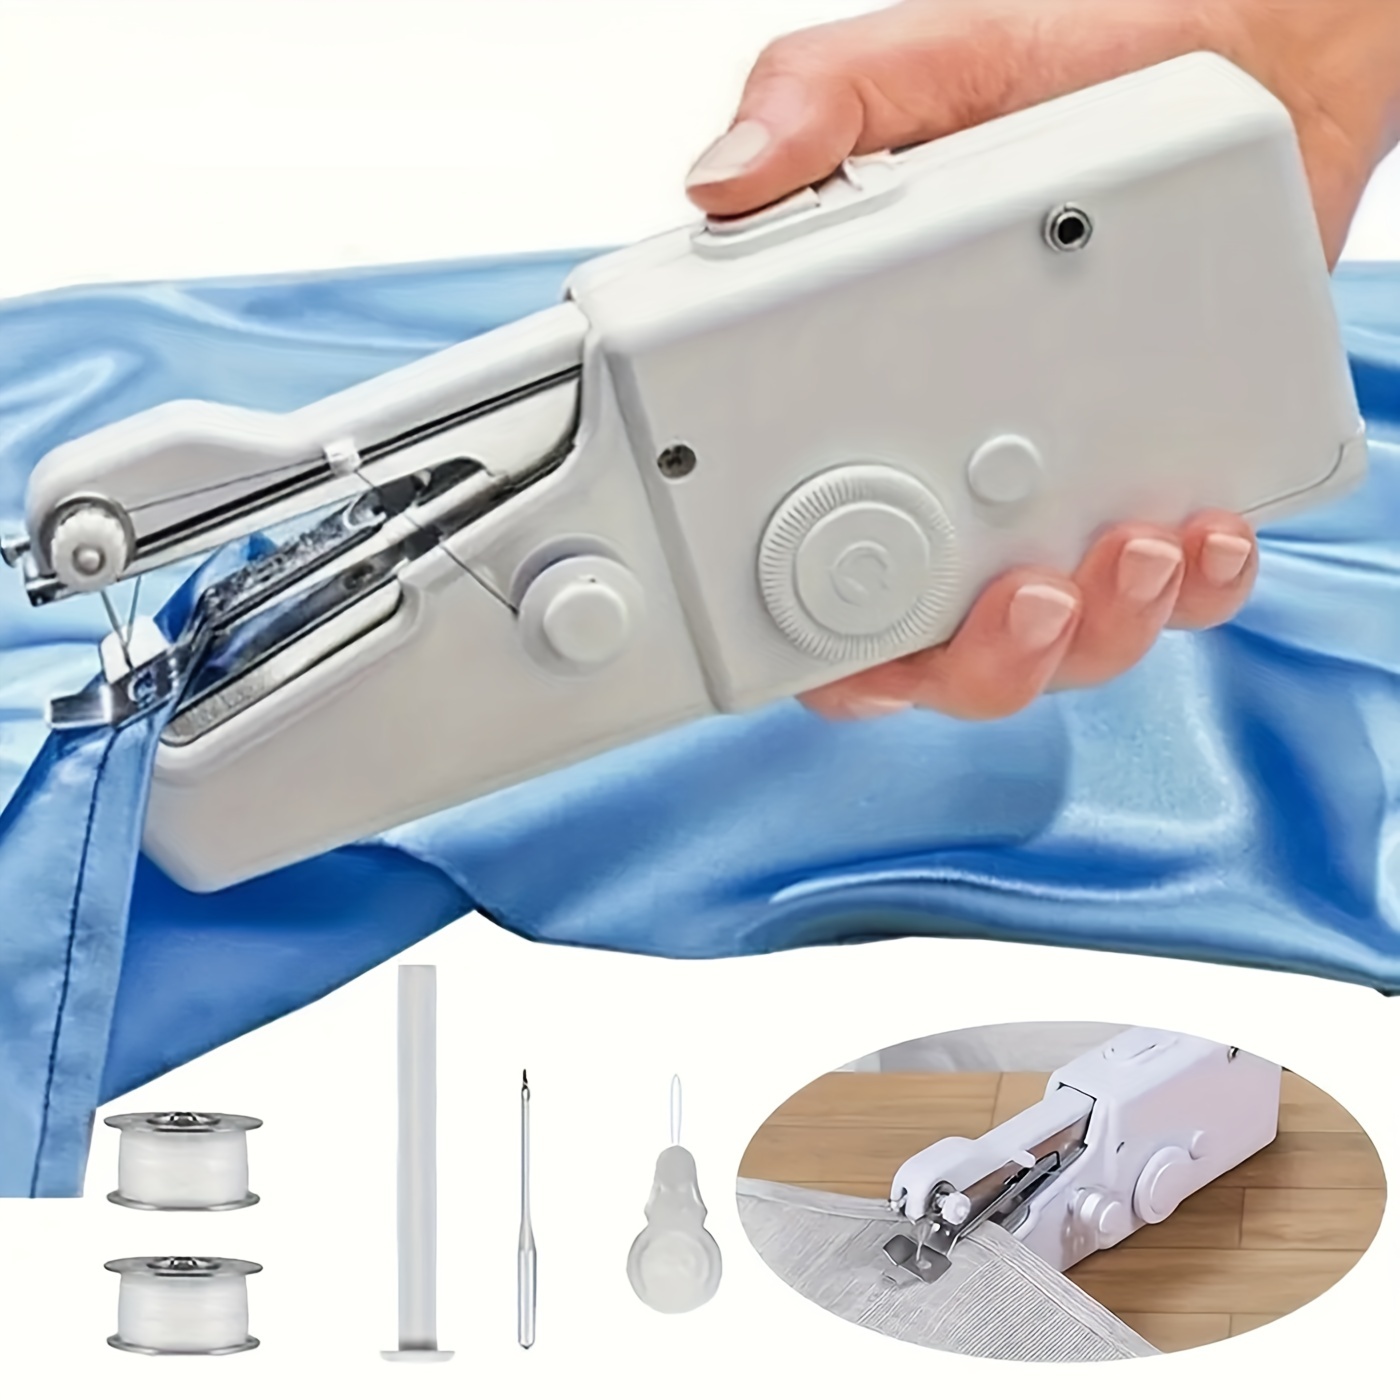 

1pc Handheld Sewing Machine Mini Sewing Machines, Portable Sewing Machine Quick Handheld Stitch Tool For Fabric, Cloth, Clothing (battery Not Included, Self-prepared 4 Aaa Batteries)